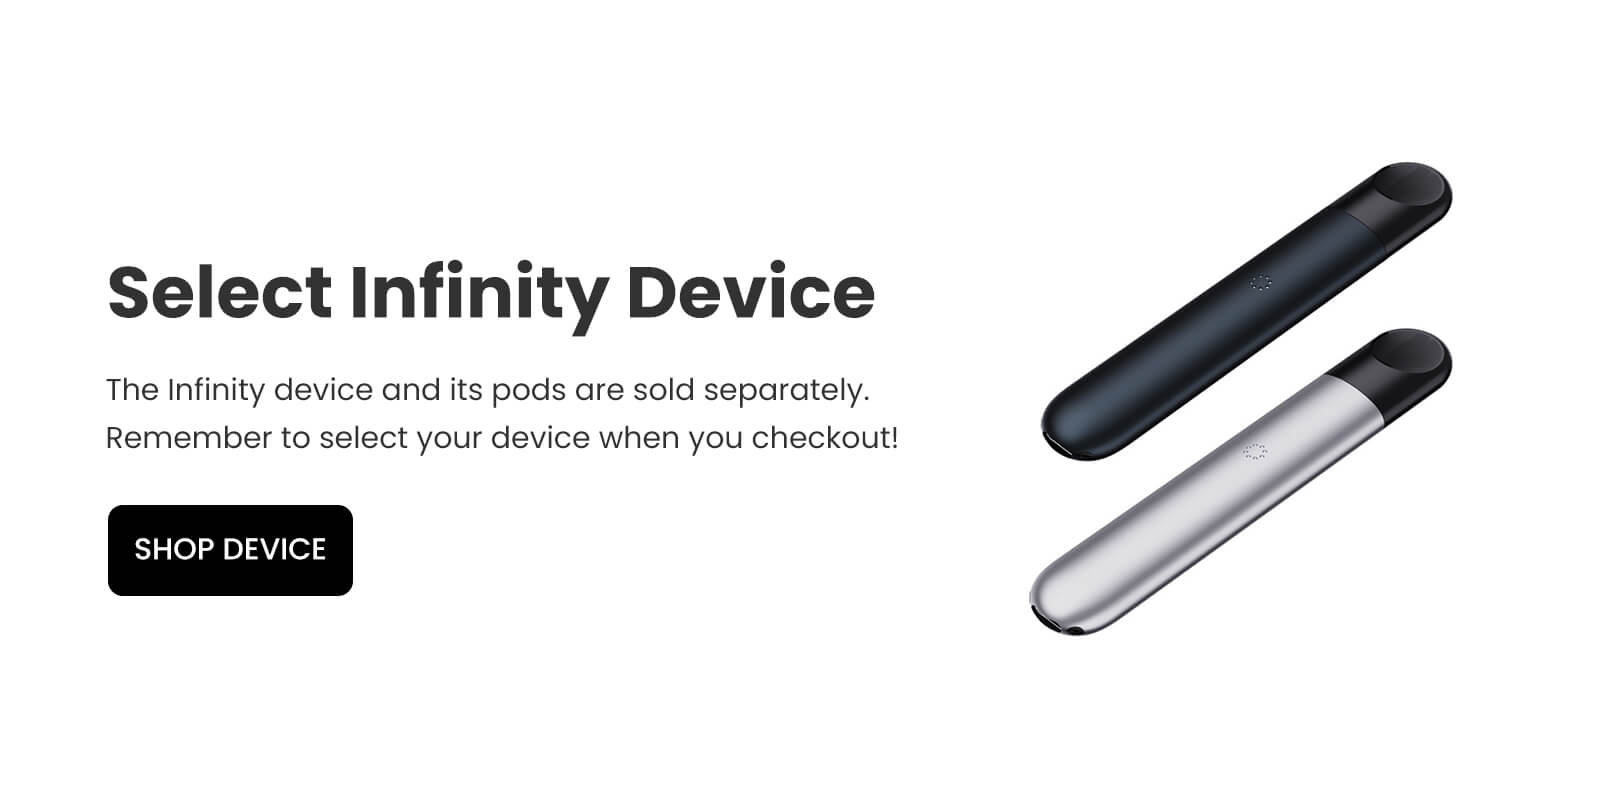 Select Infinity Device